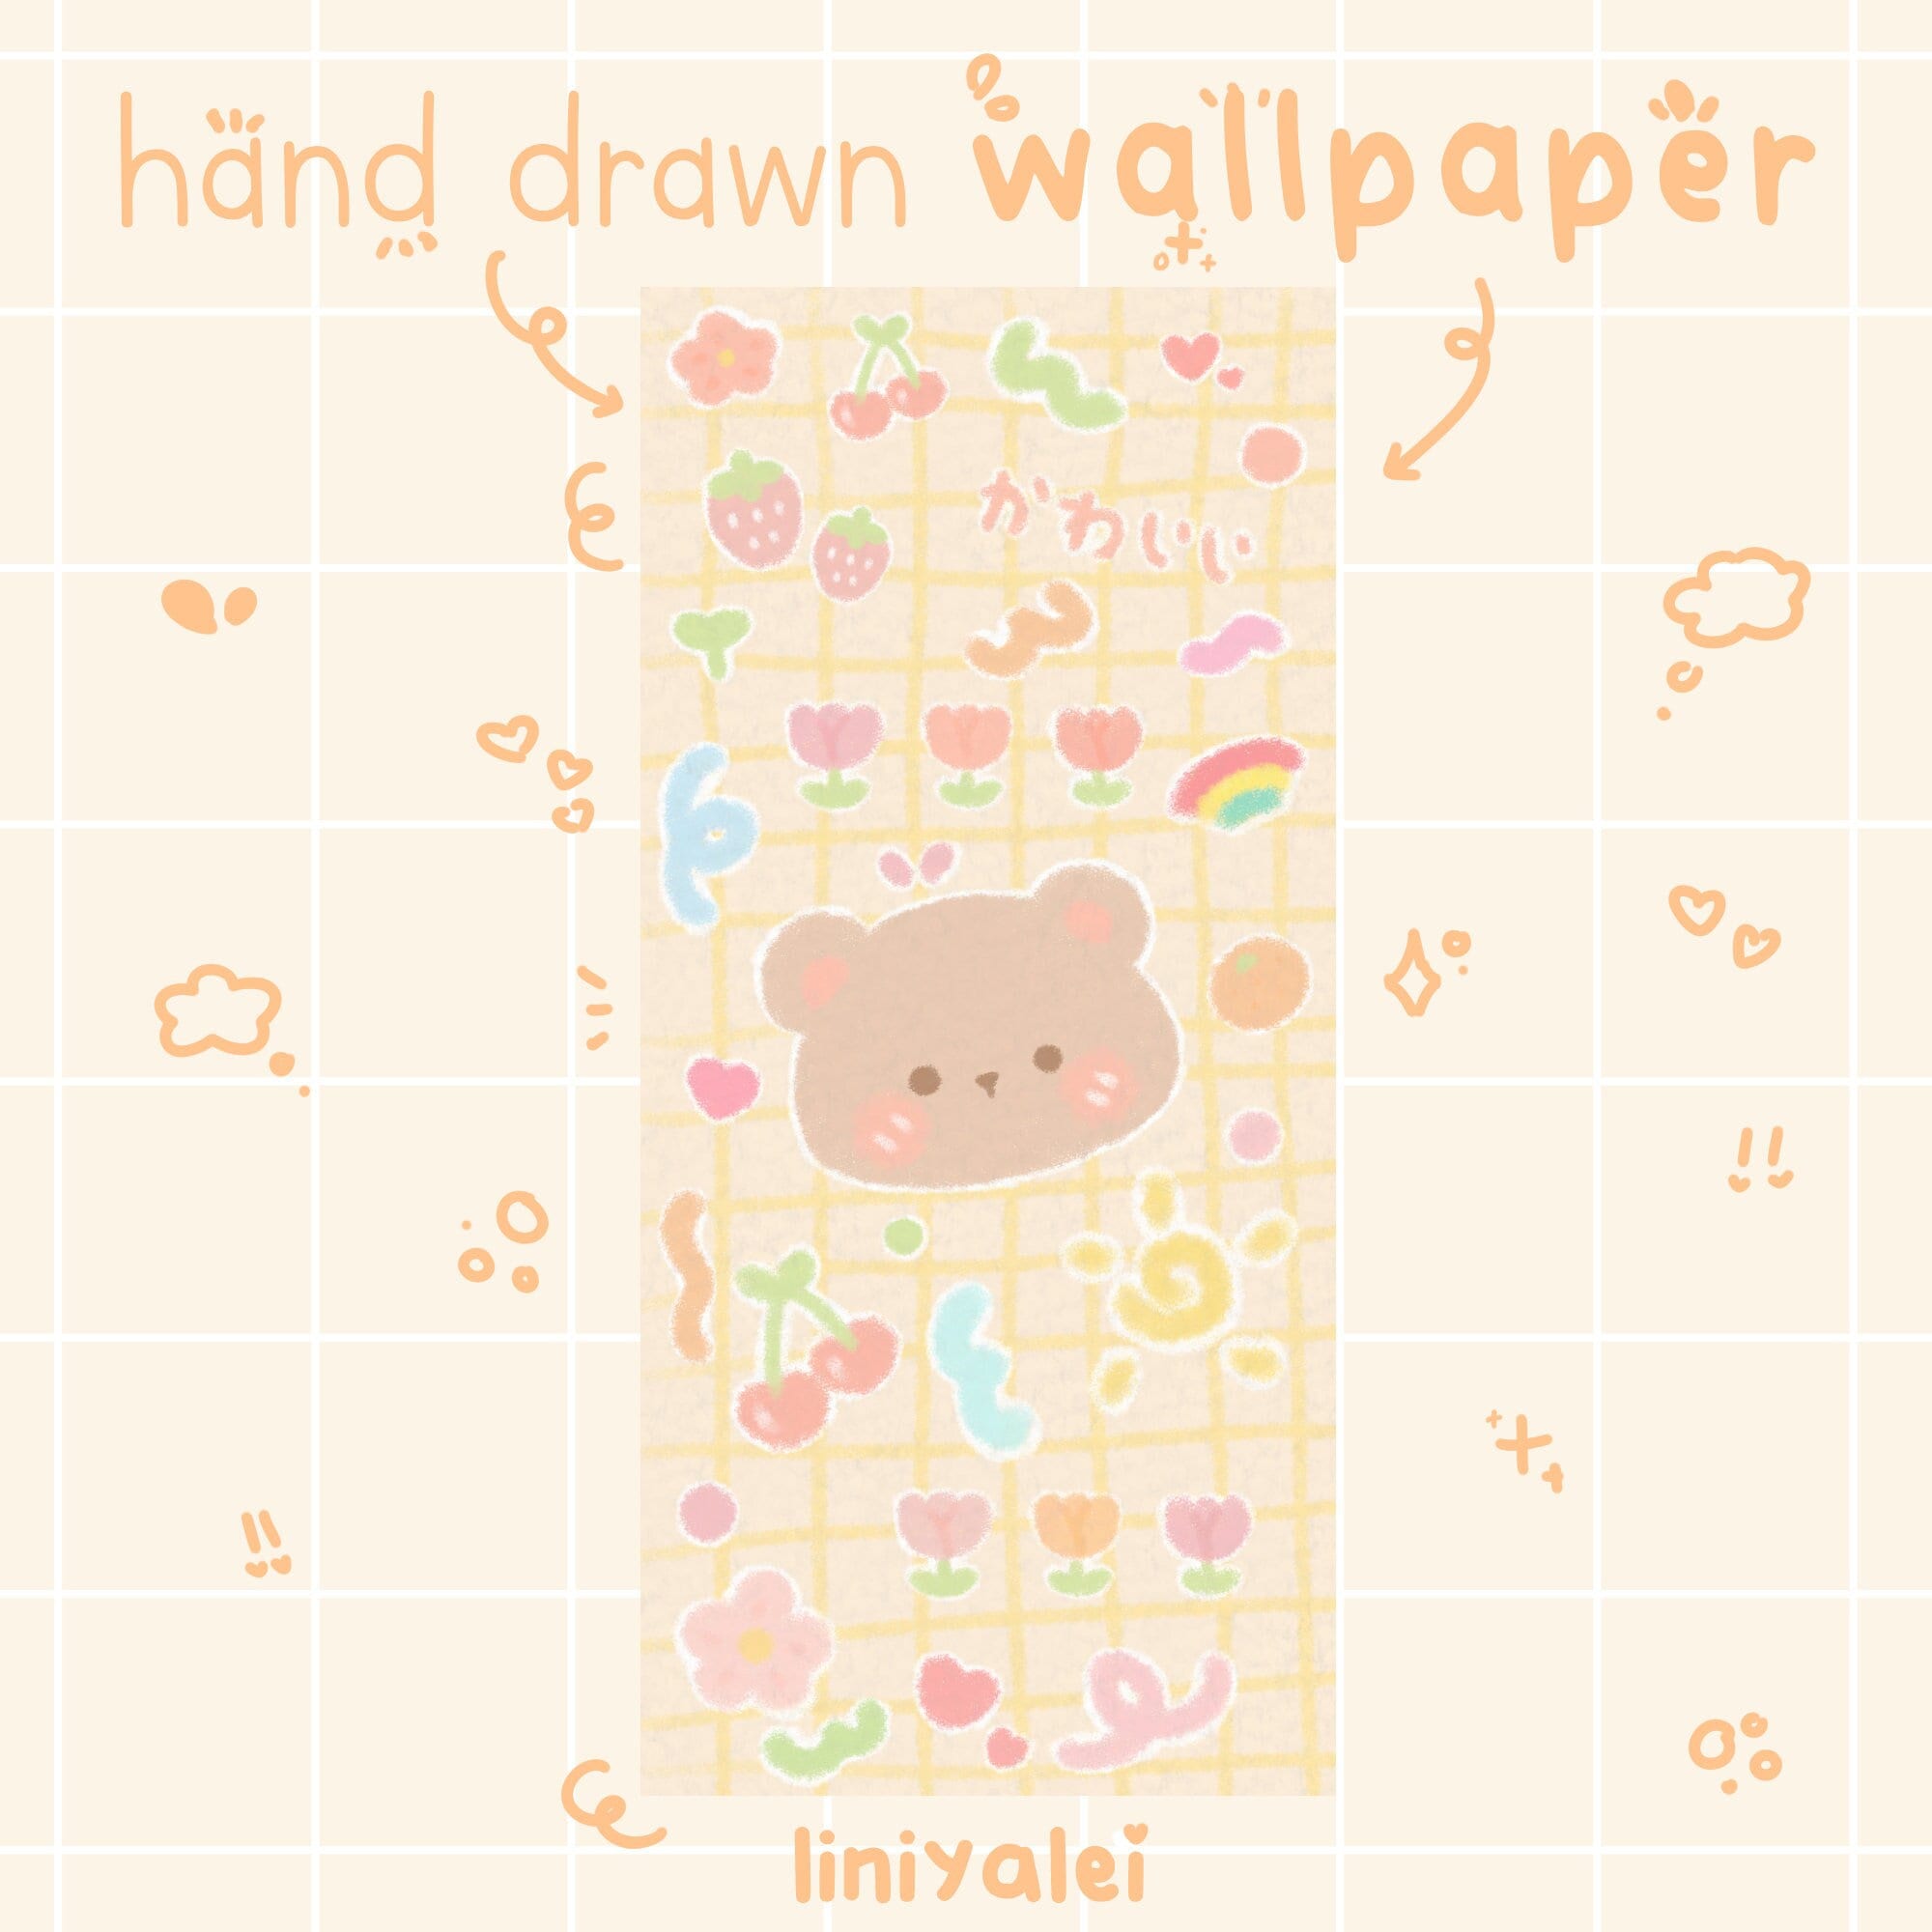 A wallpaper design with a kawaii bear surrounded by hearts, flowers, and rainbows. - Kawaii